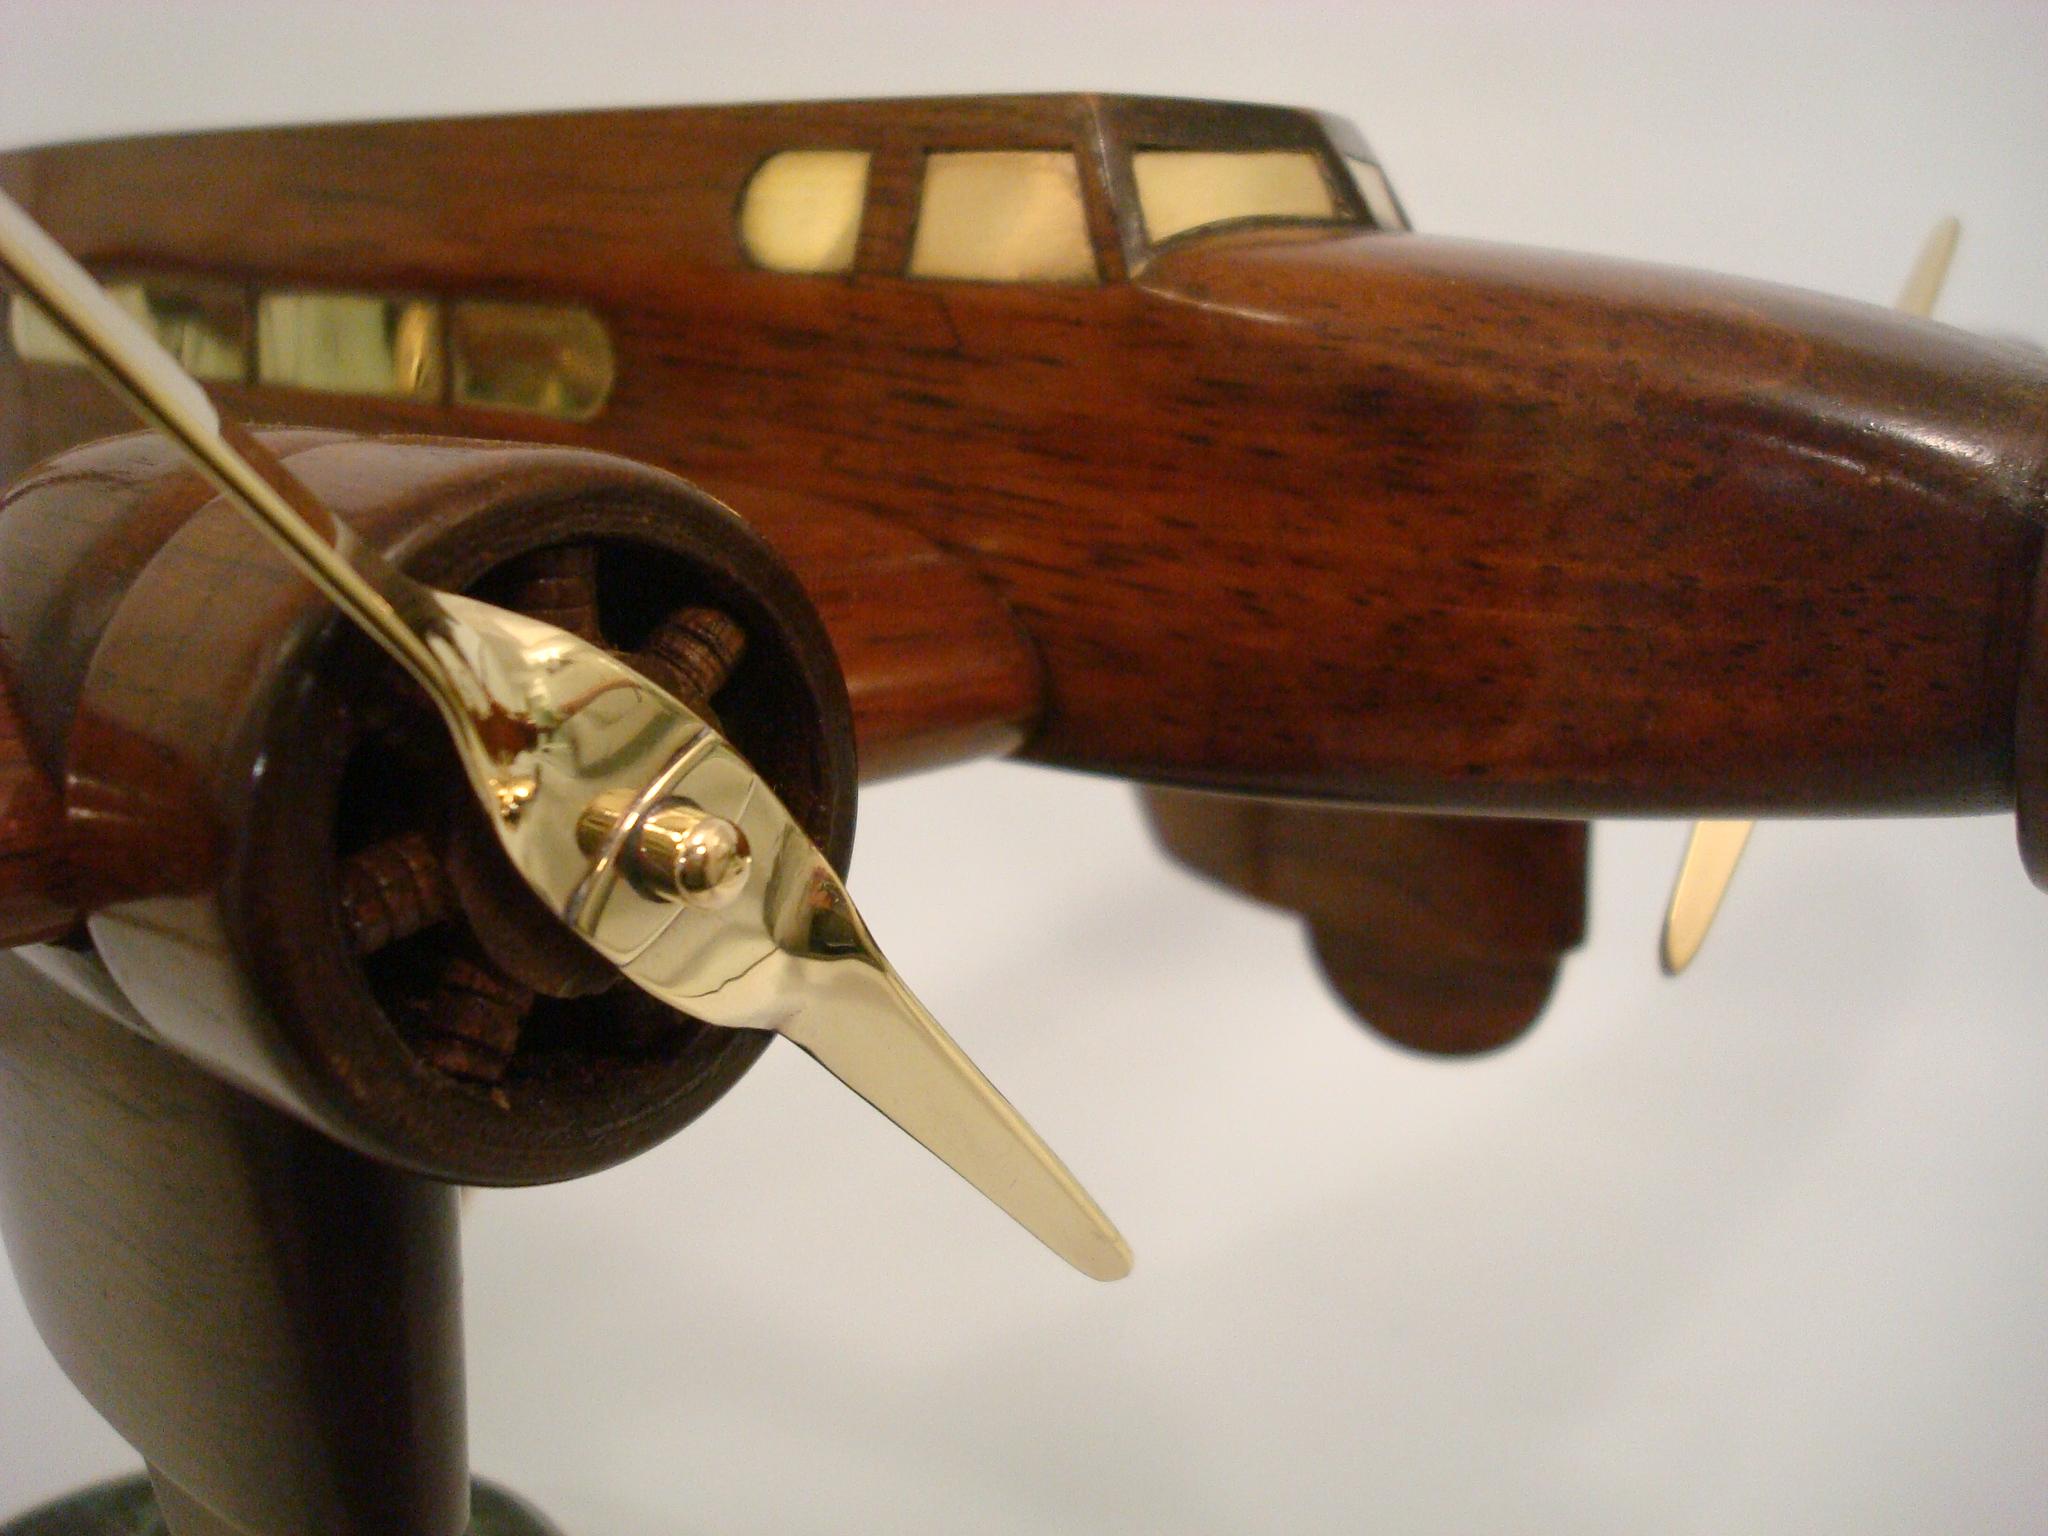 Art Deco Dewoitine Wooden Counters Desk Model Airplane 1930s French In Good Condition For Sale In Buenos Aires, Olivos